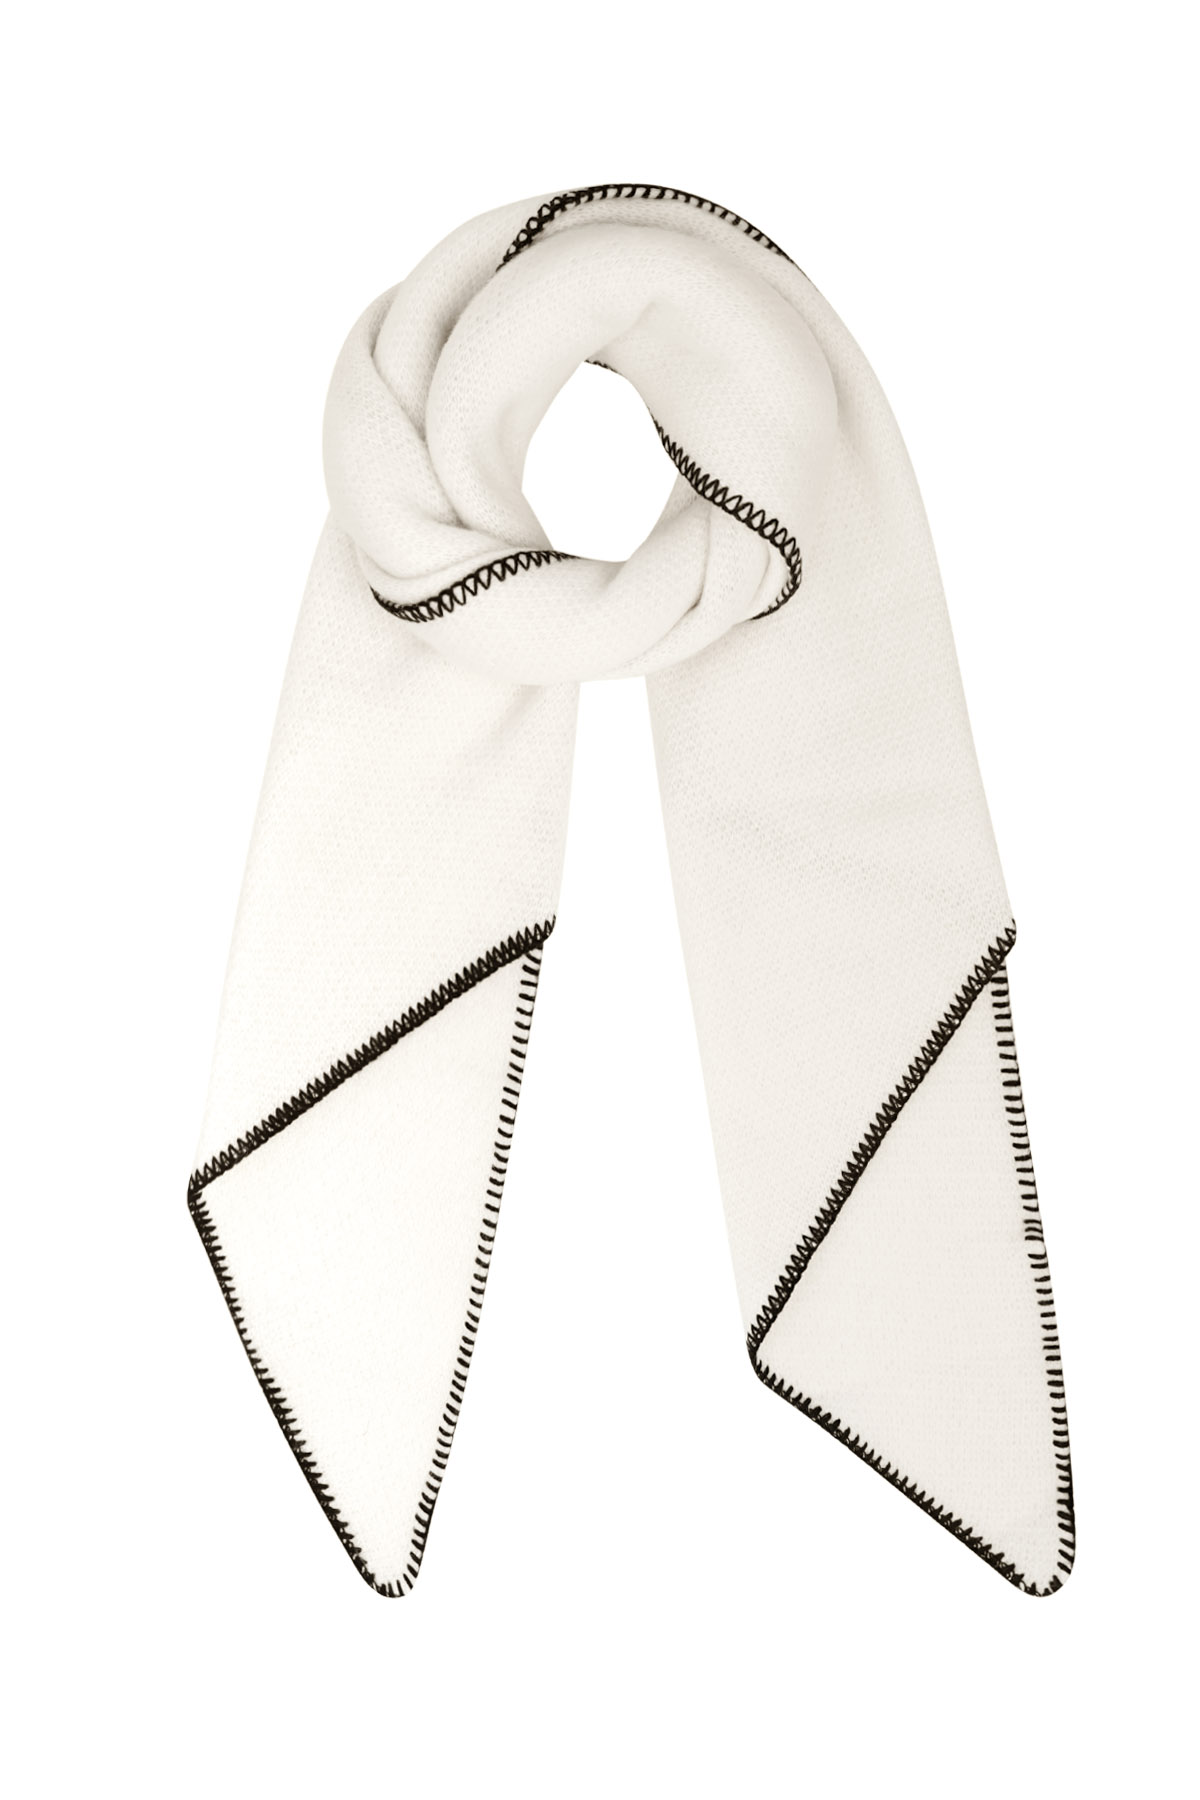 Winter scarf single-colored with black stitching - white h5 